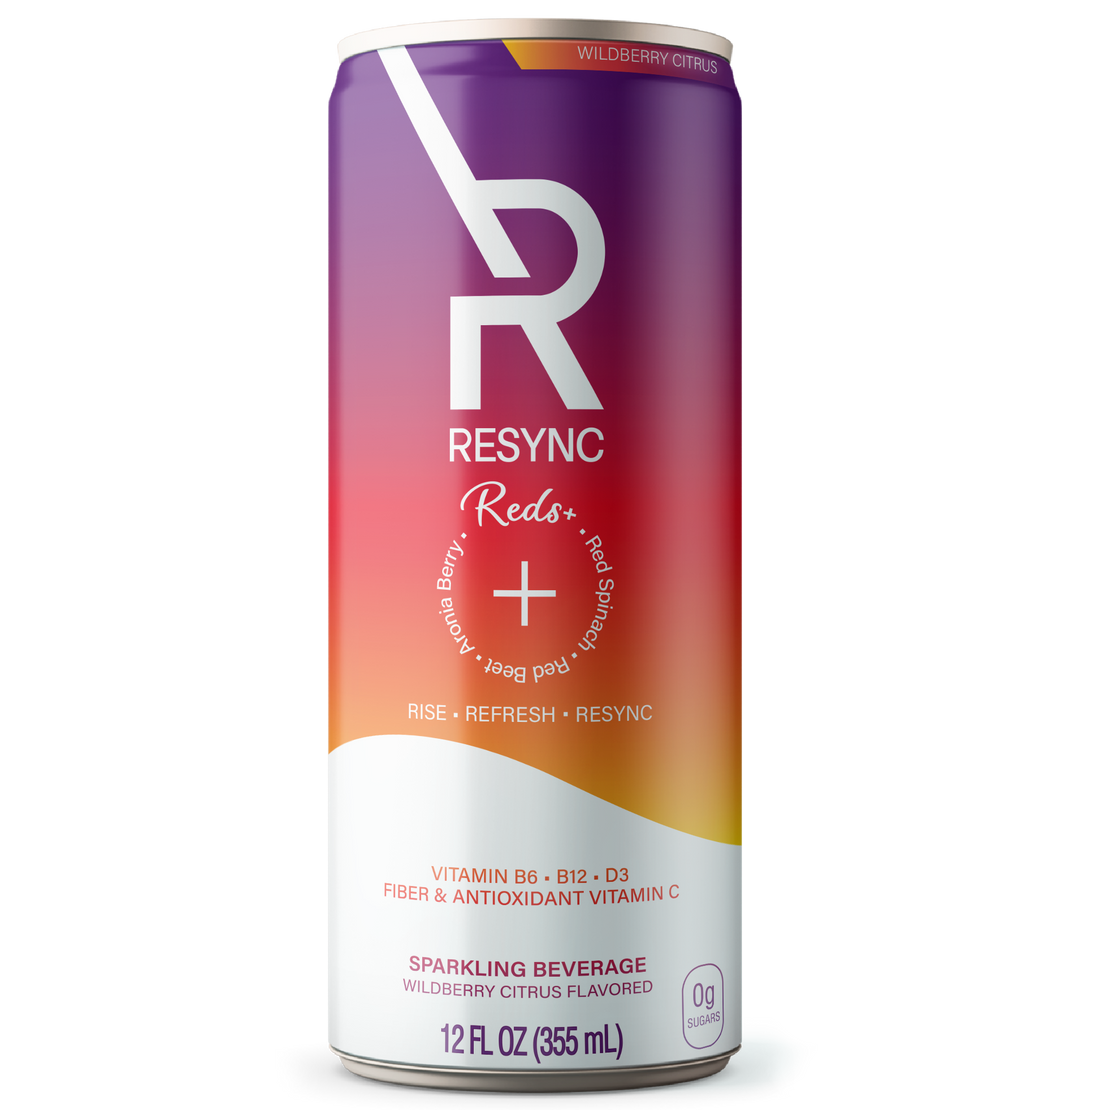 Resync Sparkling Functional Beverage - Wildberry Citrus